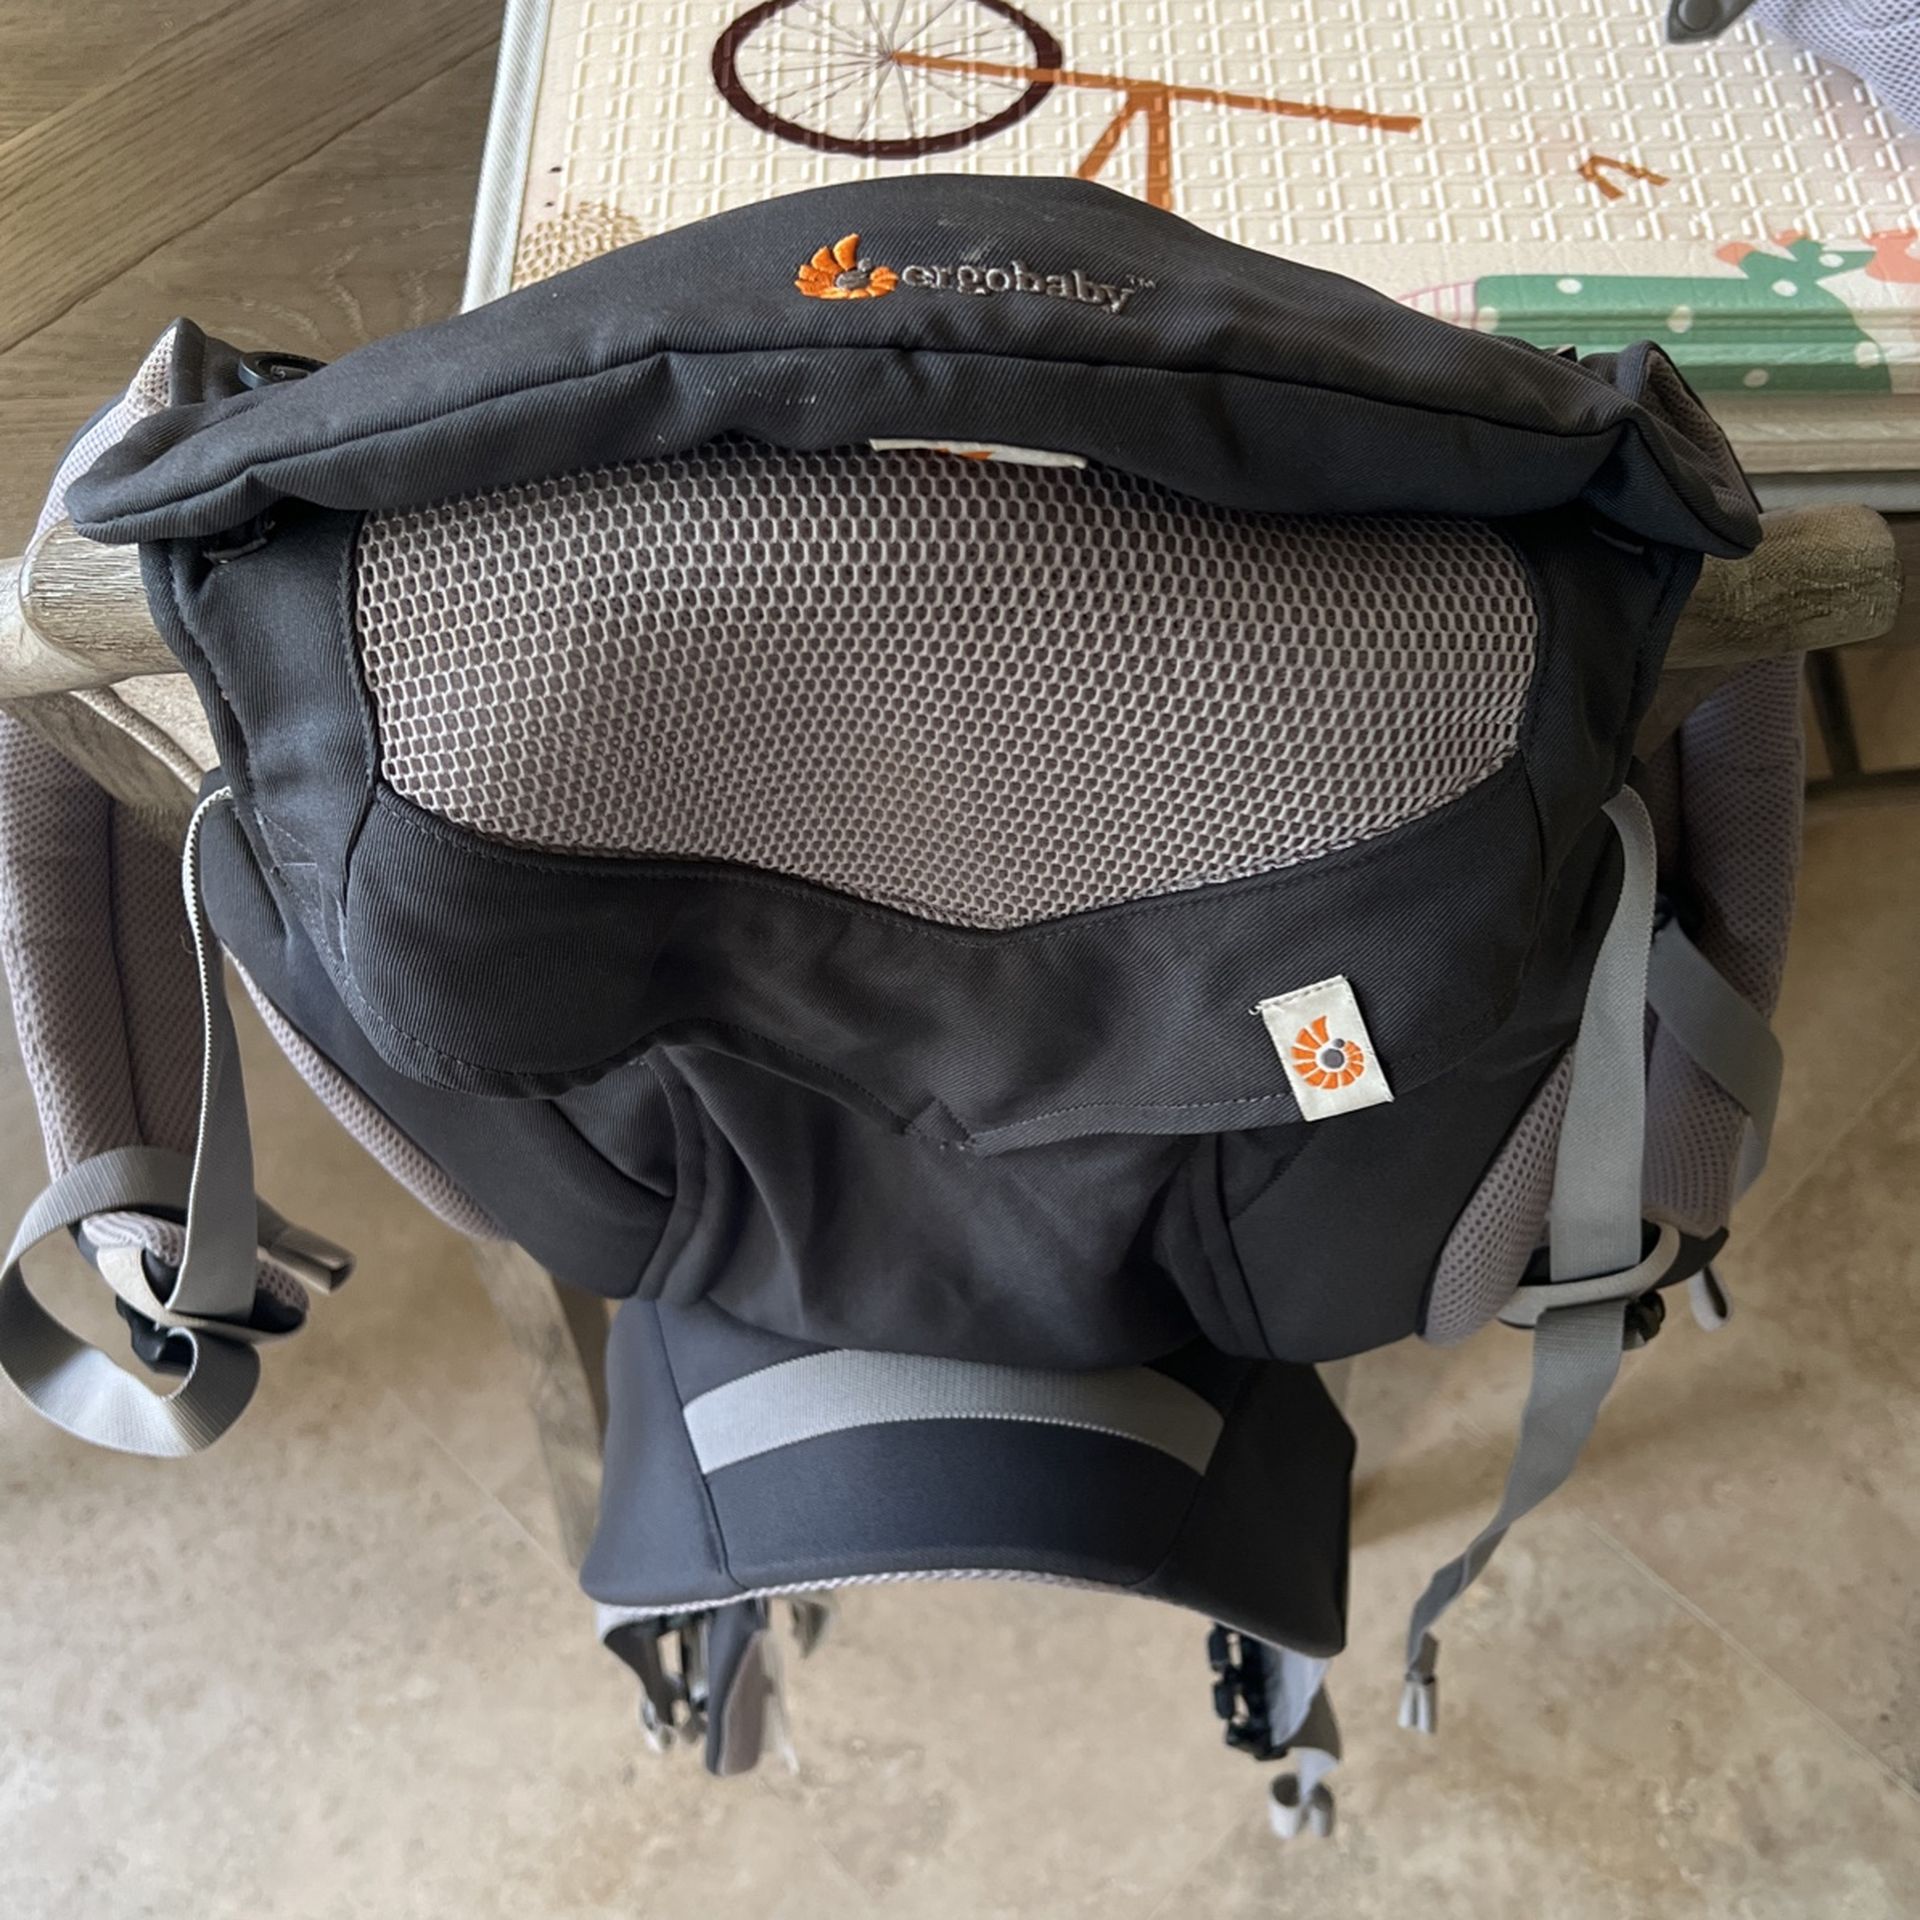 ErgoBaby Carrier With Infant Insert